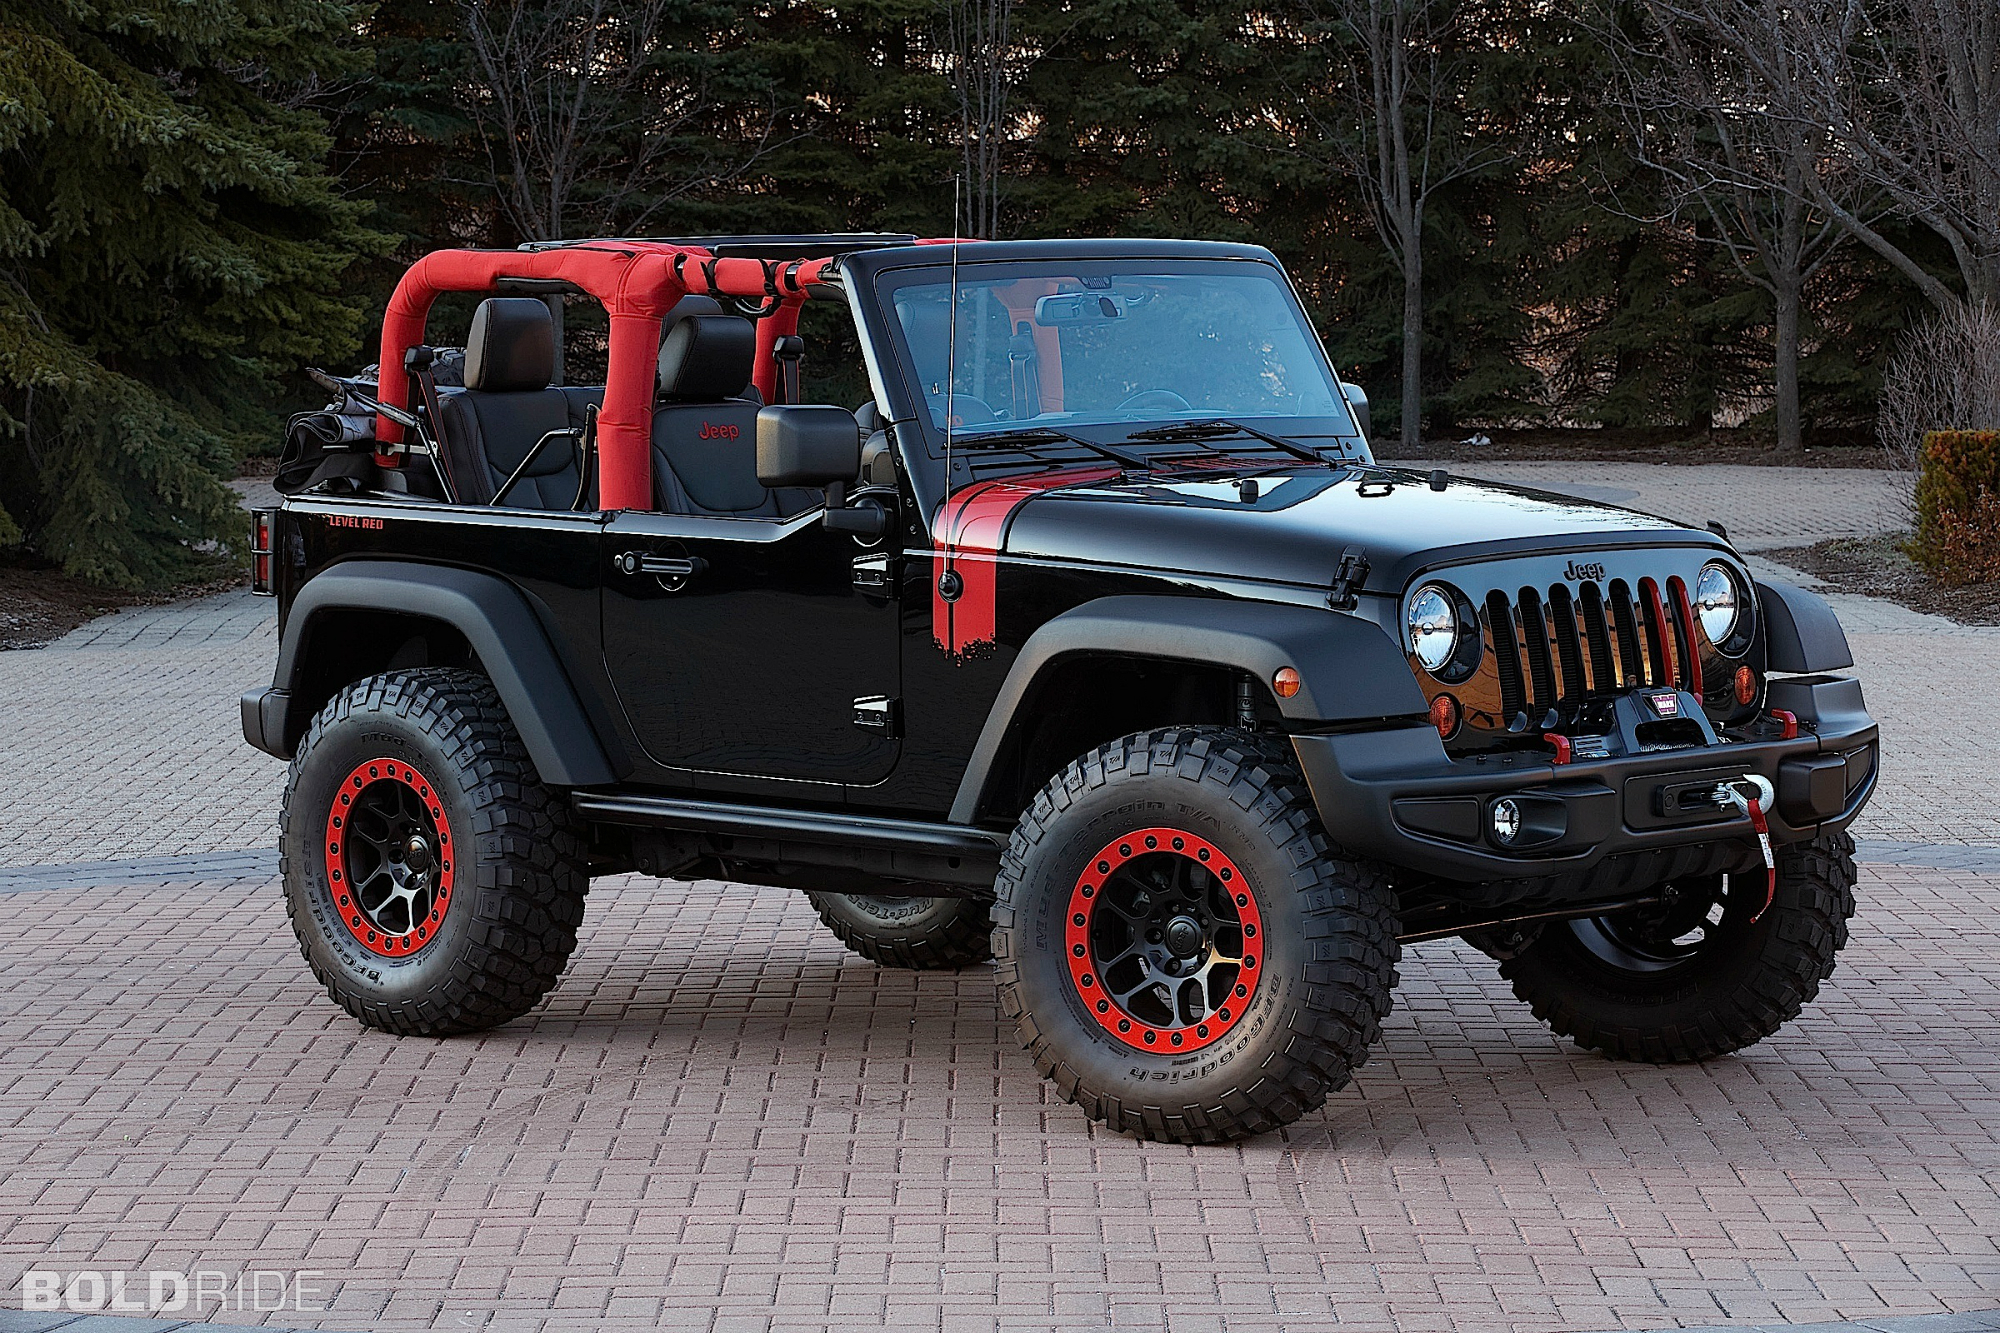 2014 Jeep Wrangler Level Red Concept 1600 x 1200